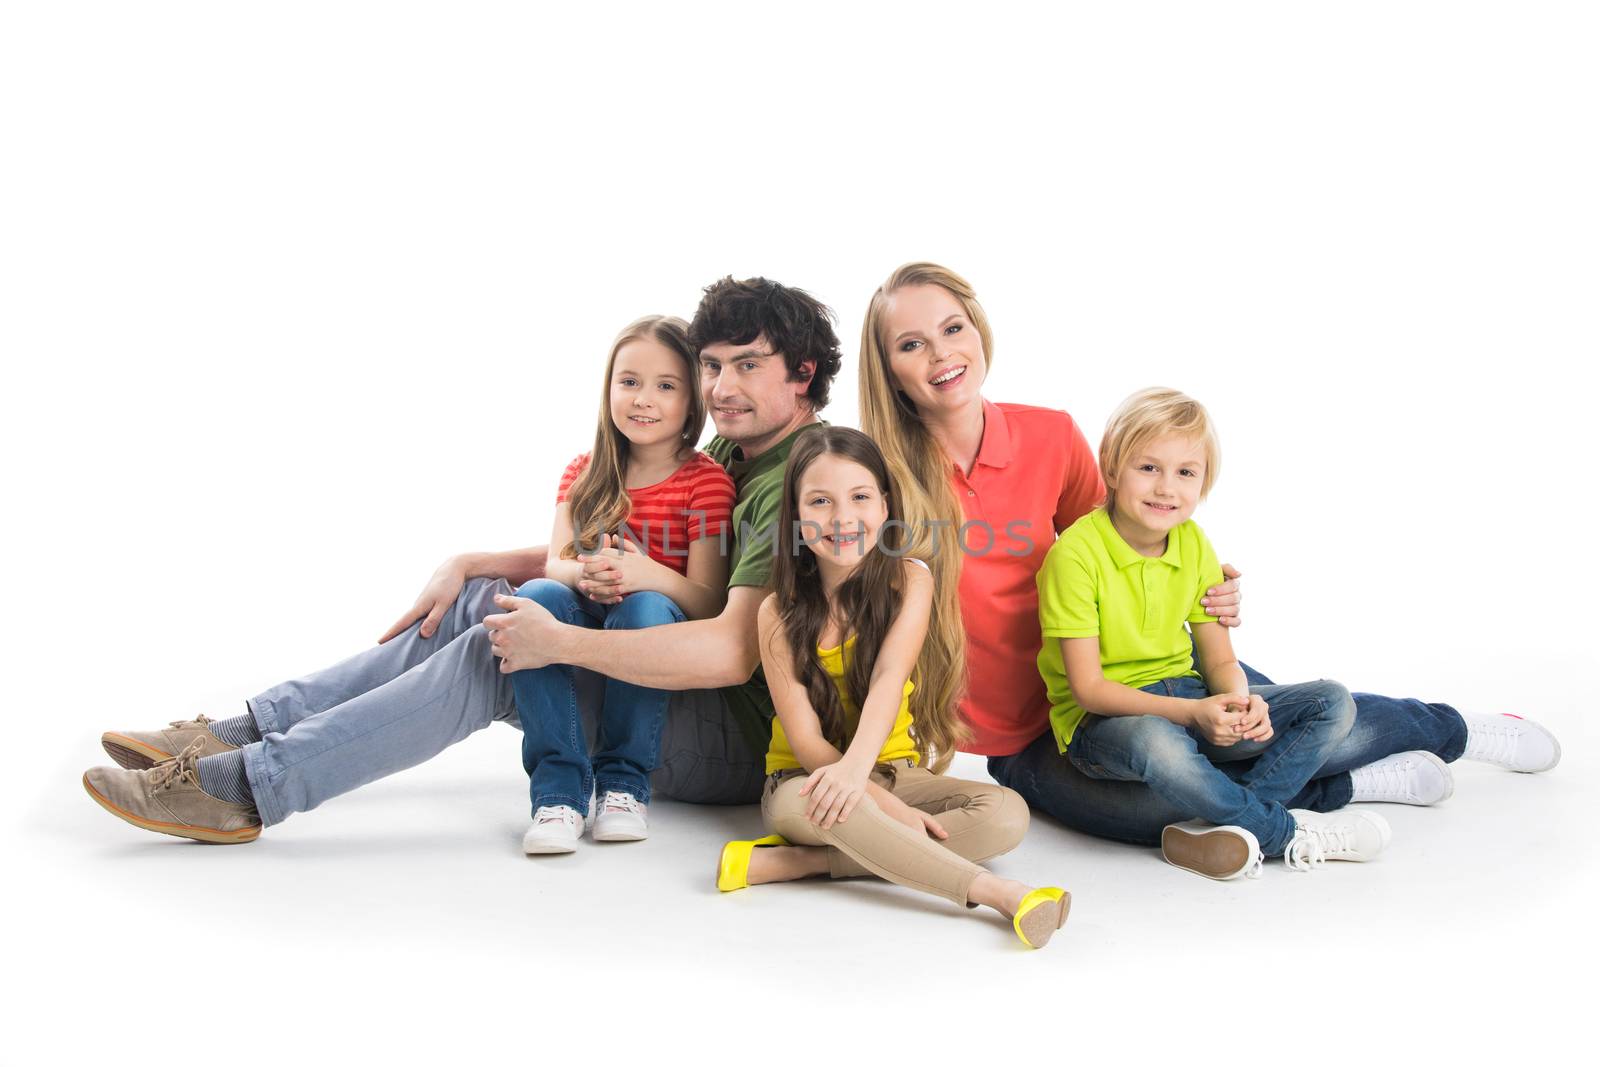 Happy smiling family of two parents and three children sitting on the floor studio isolated on white background